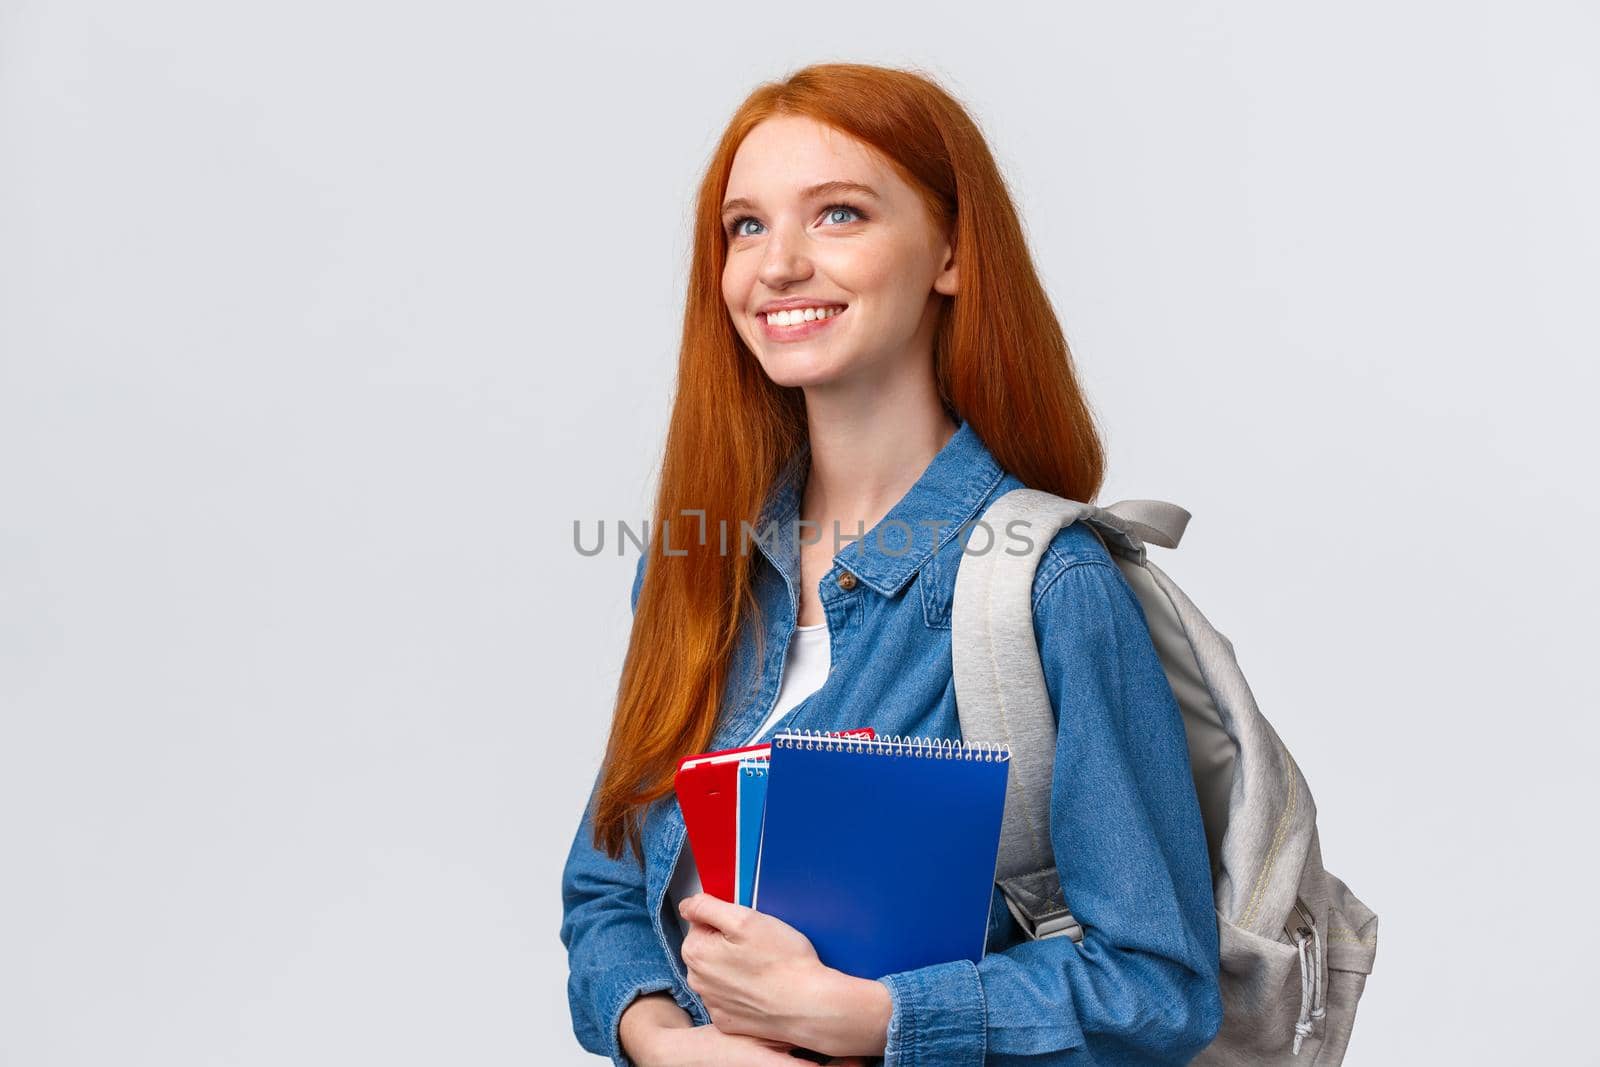 Youth, teenagers and education concept. Determined good-looking dreamy and upbeat smiling redhead female student with notebooks and backpack looking forward new theme in class.